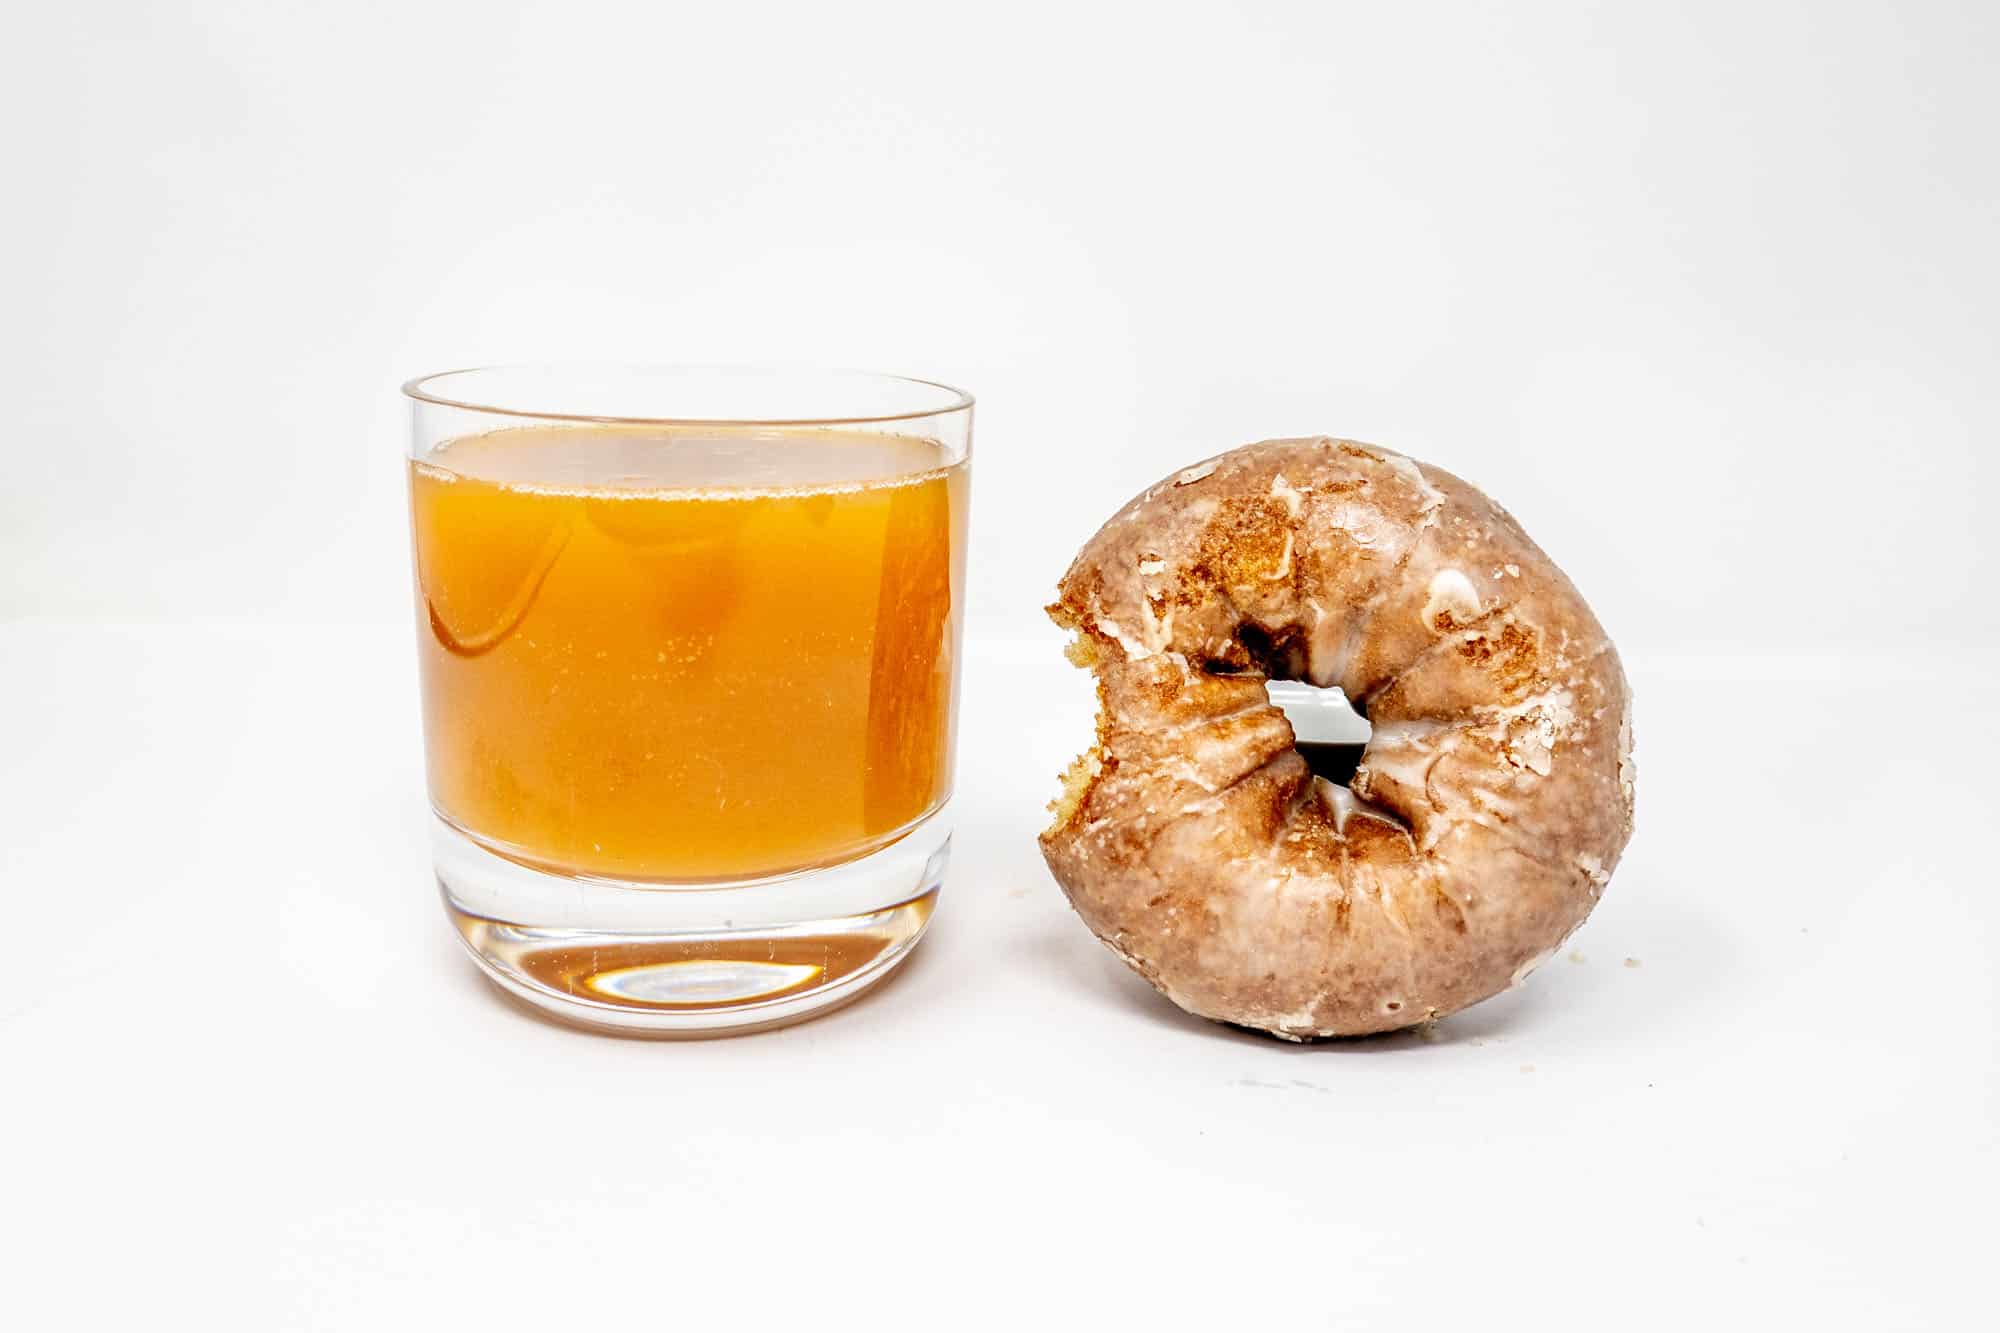 Glazed doughnut with a bite taken out beside a glass of apple cider